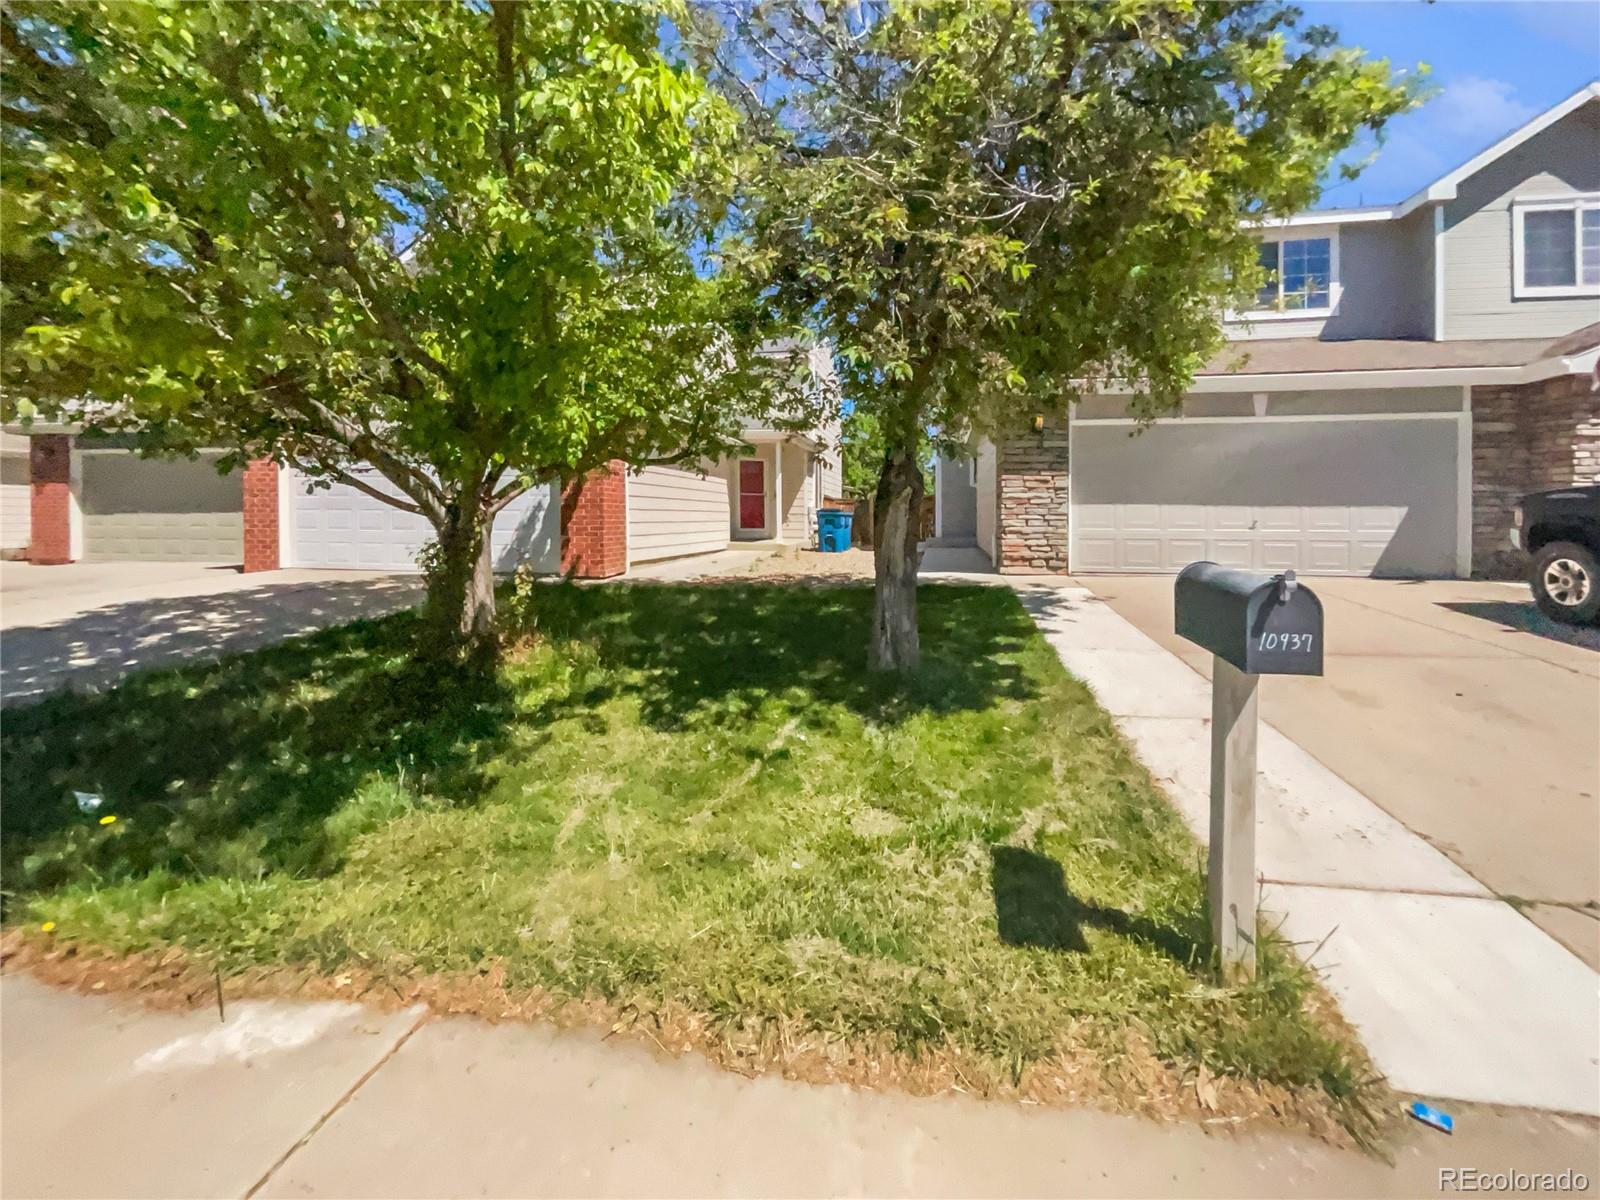 View Commerce City, CO 80022 townhome